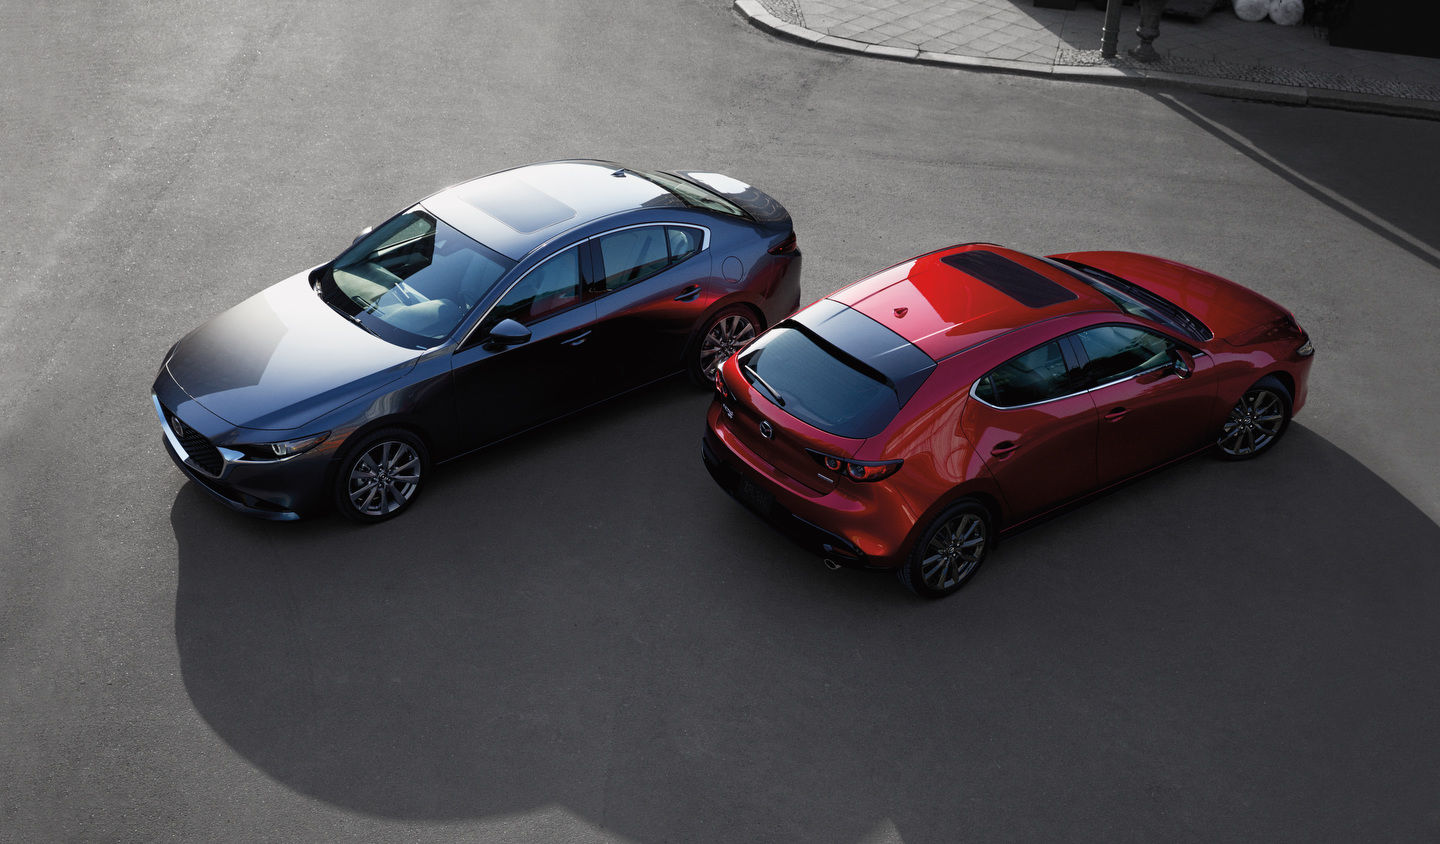 Three surprising features of the 2022 Mazda3